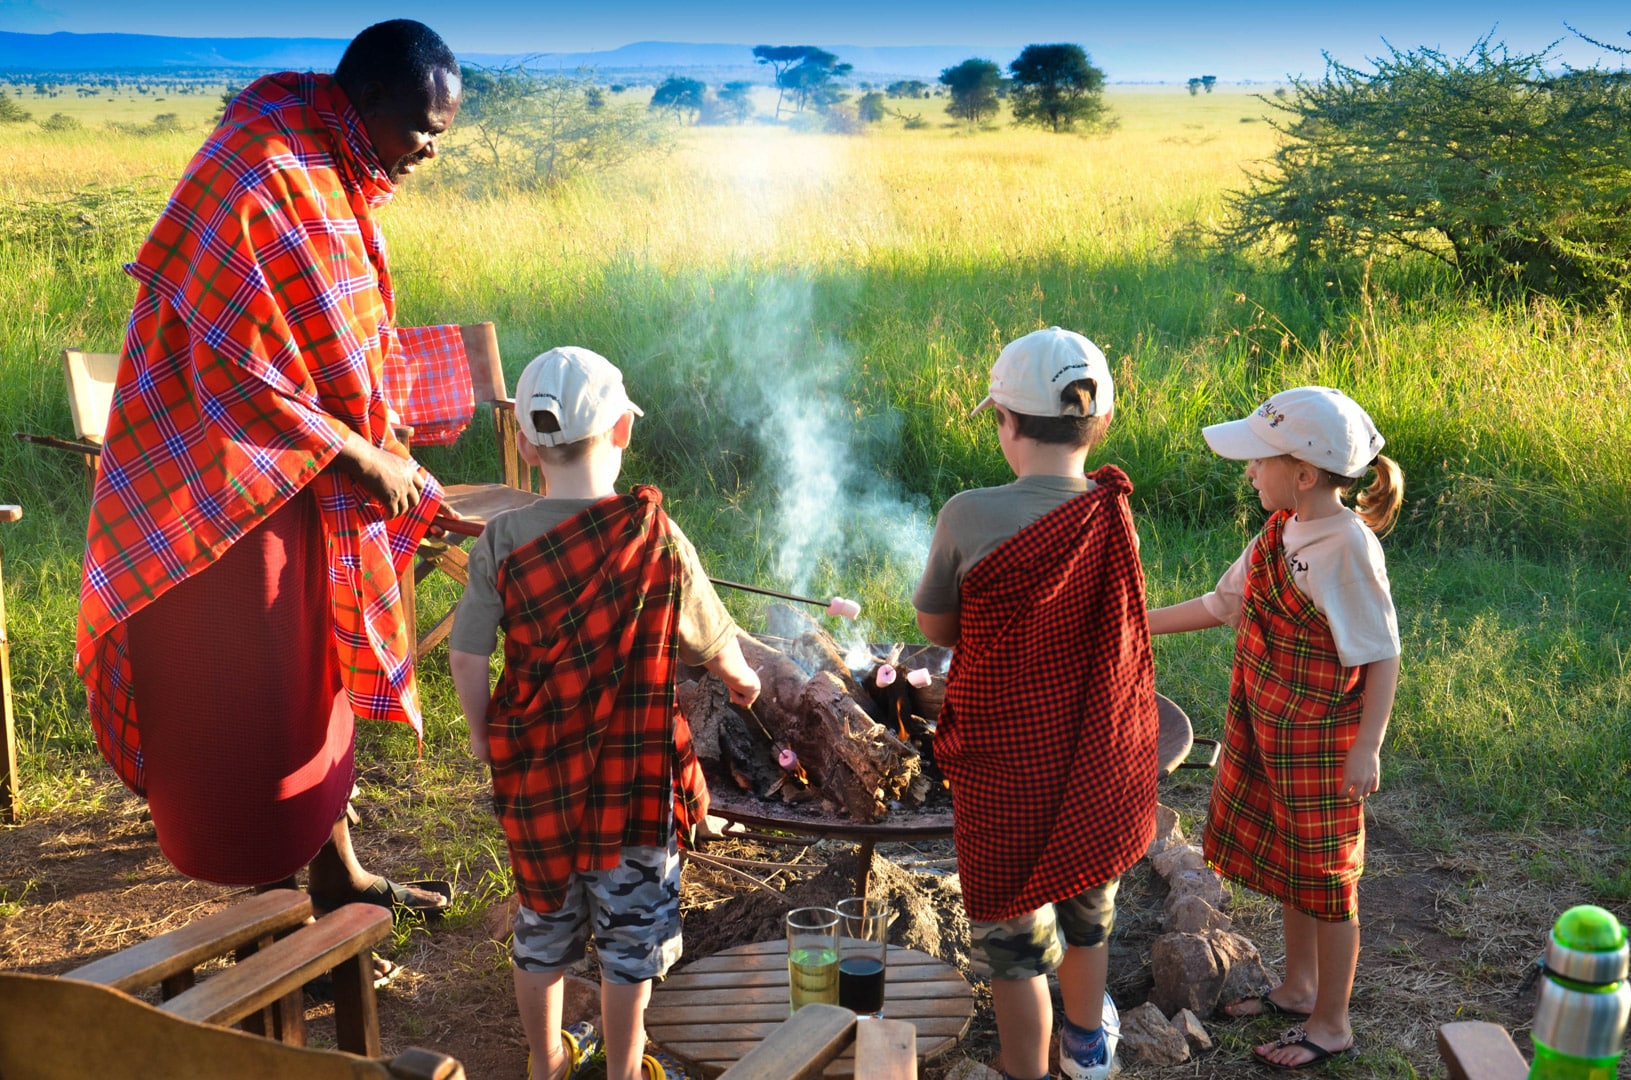 The Lemala Cubs programme at Lemala Kuria Hills offers a wide range of fun and educational activities for kids.